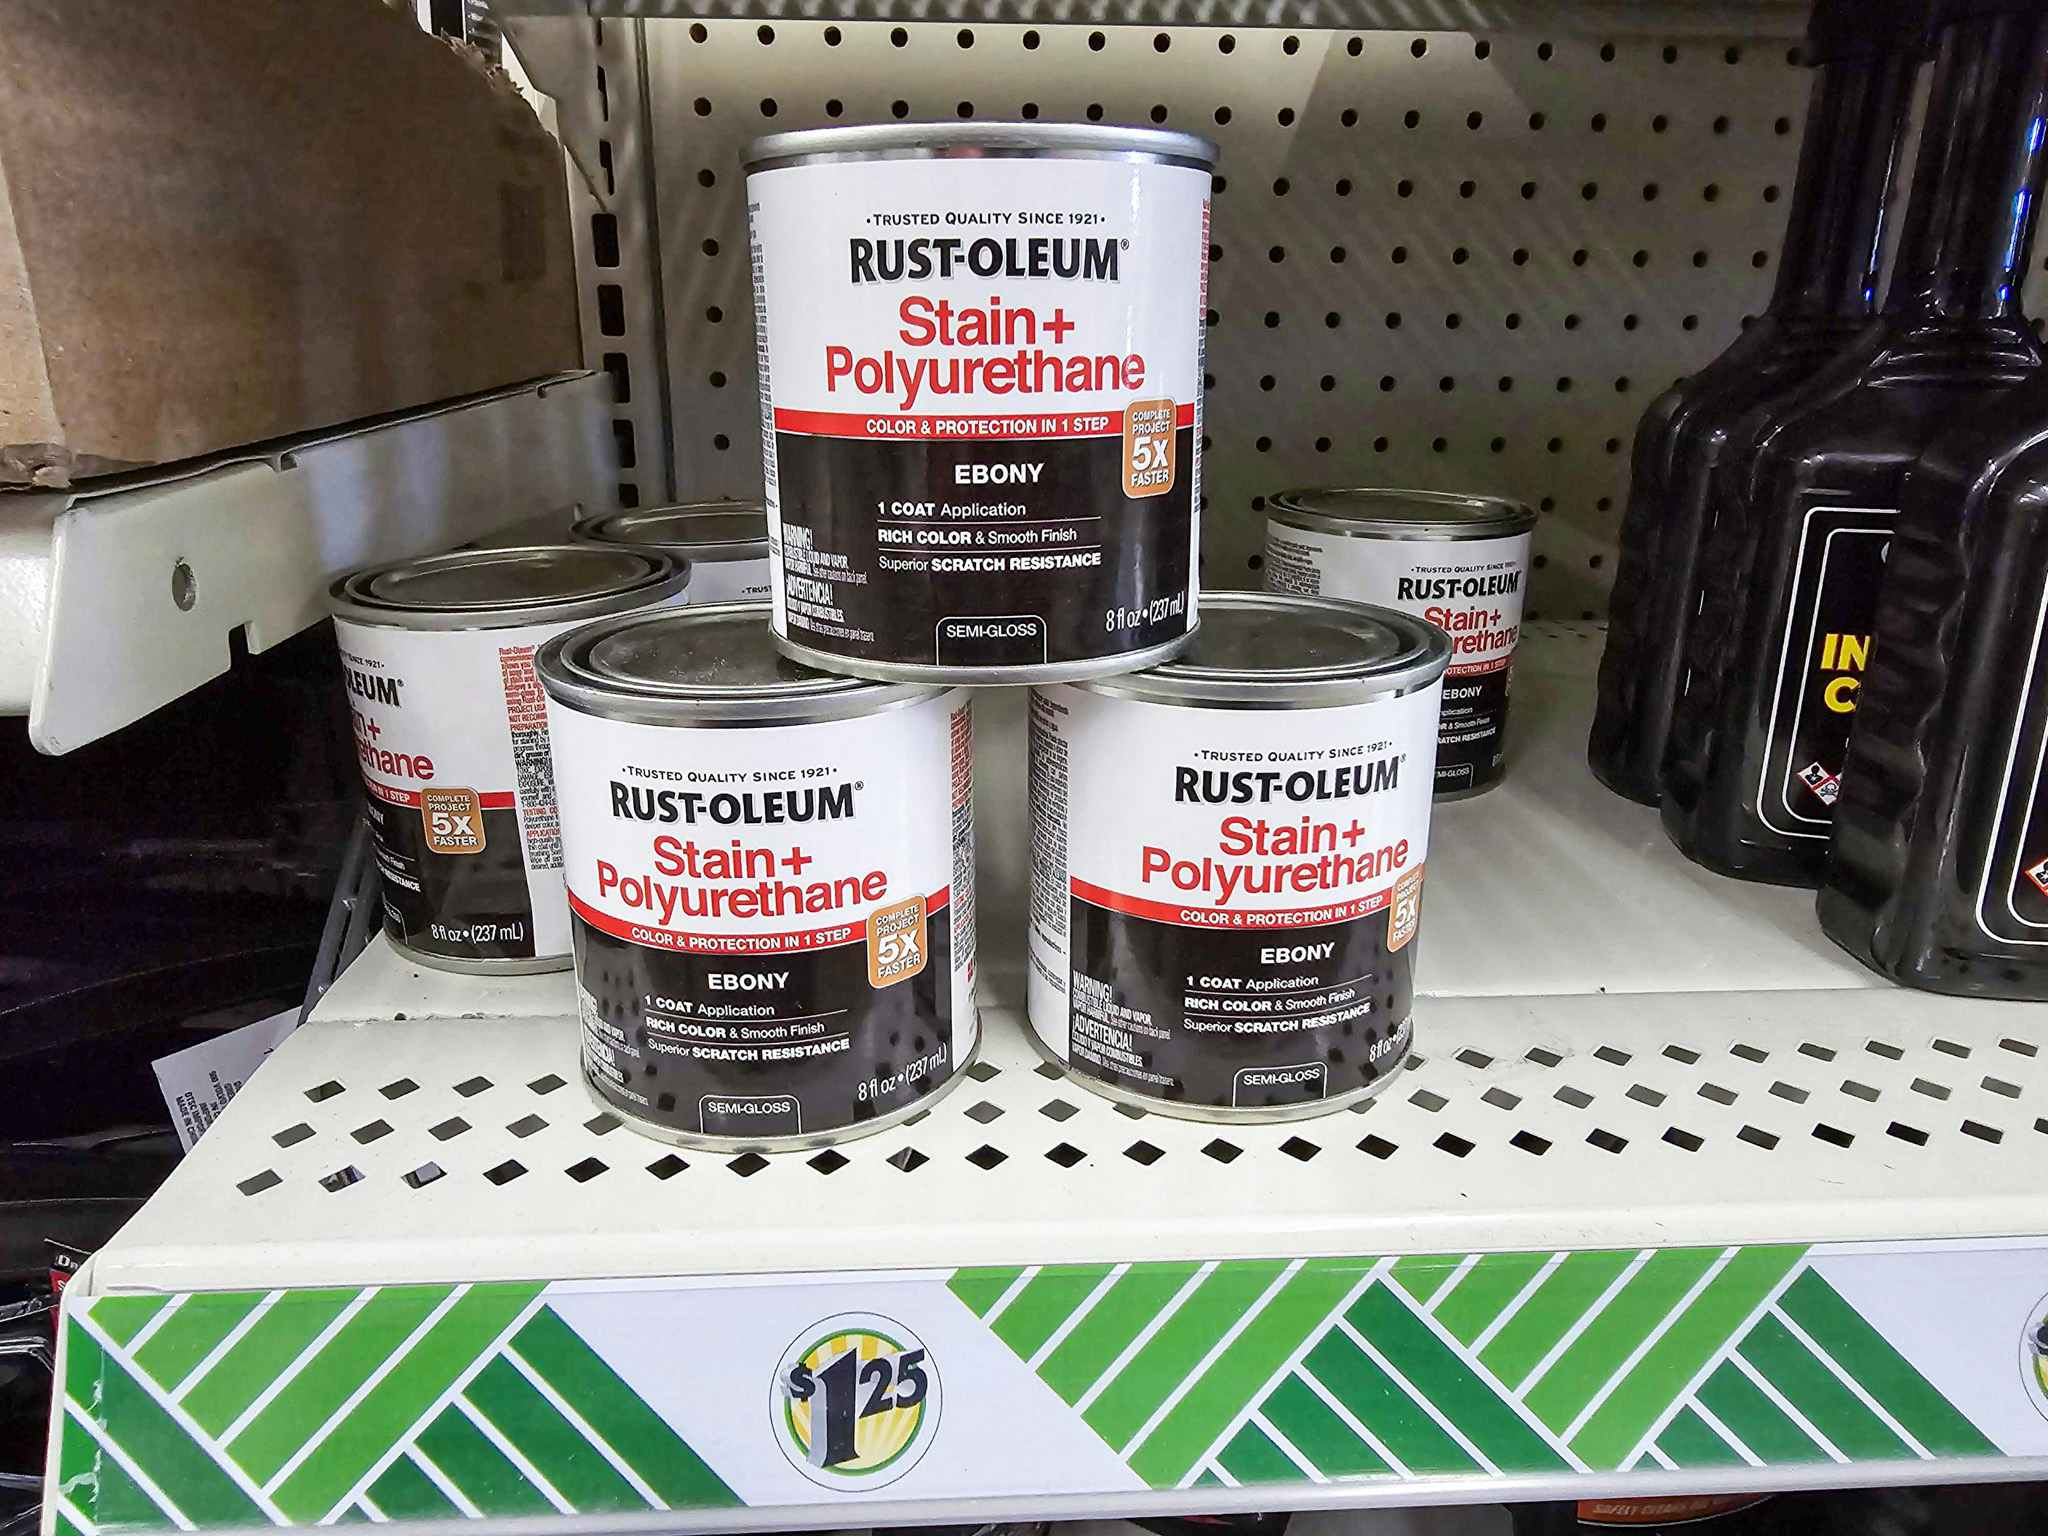 cans of rustoleum stain and polyurethane on a shelf